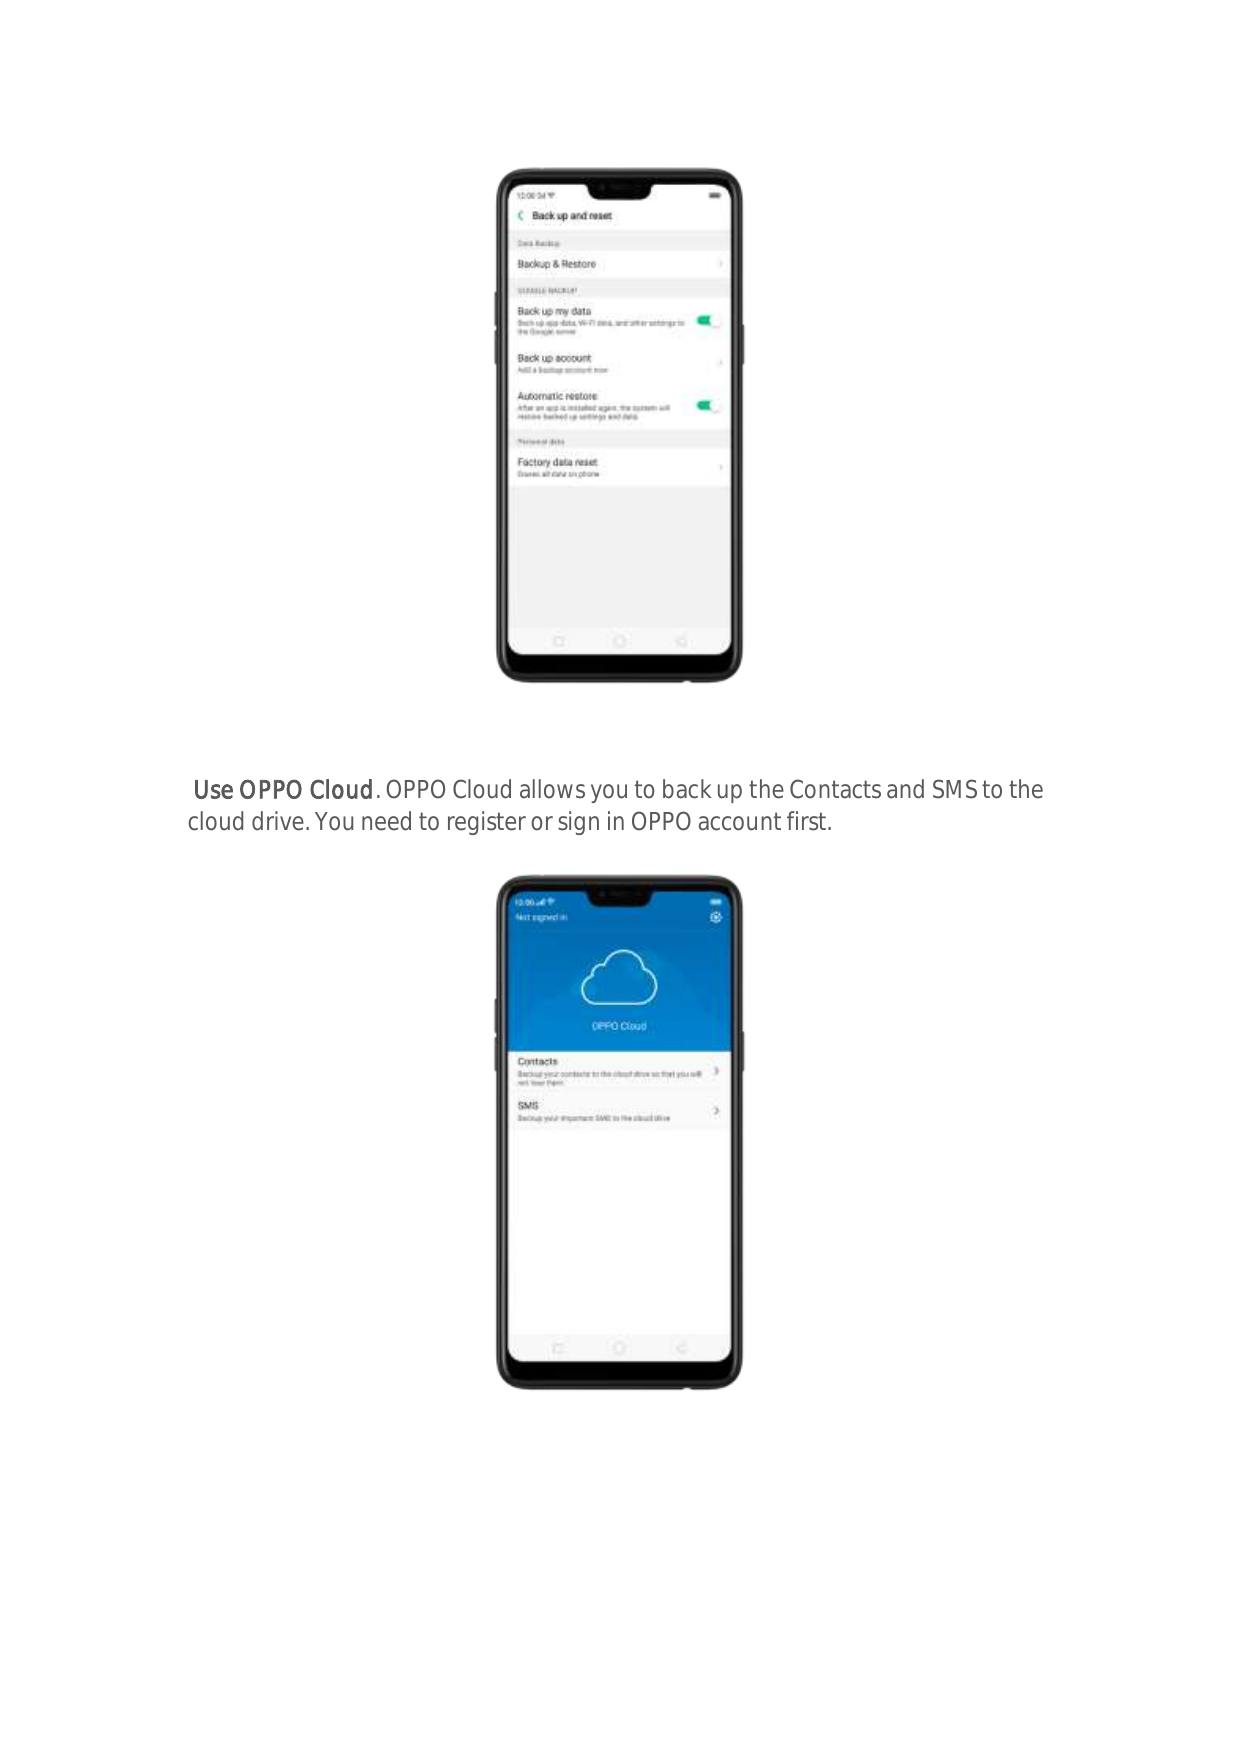 Use OPPO Cloud. OPPO Cloud allows you to back up the Contacts and SMS to thecloud drive. You need to register or sign in OPPO ac